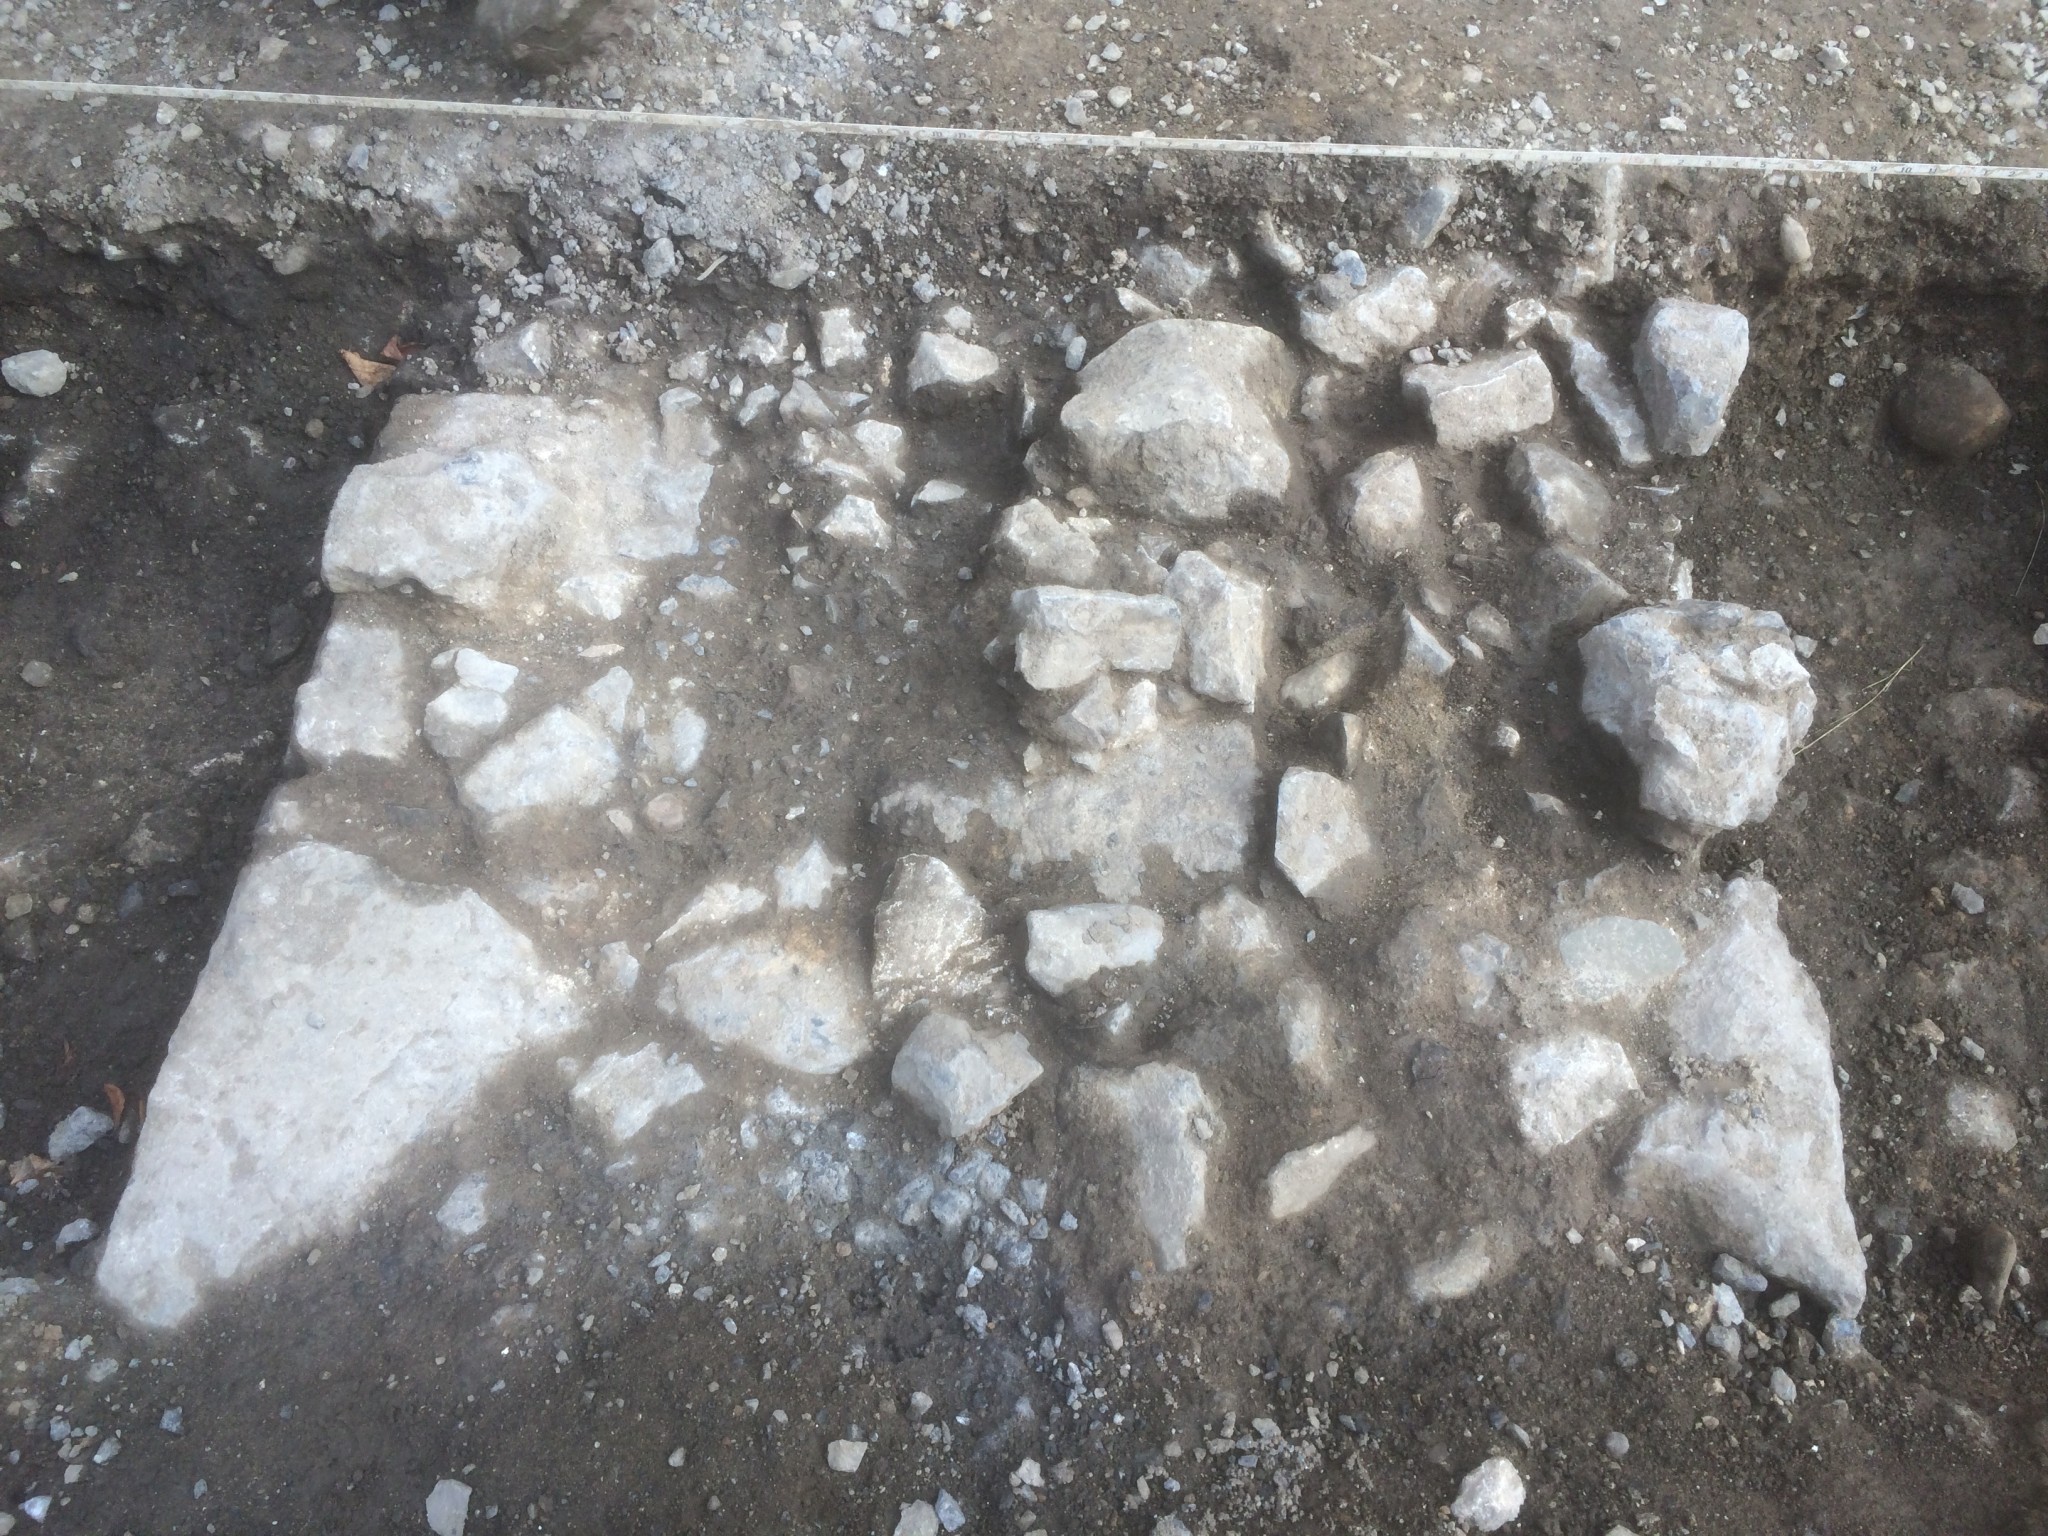 The foundations of the medieval town wall of Buttevant uncovered during our excavations (Copyright Rubicon Heritage)